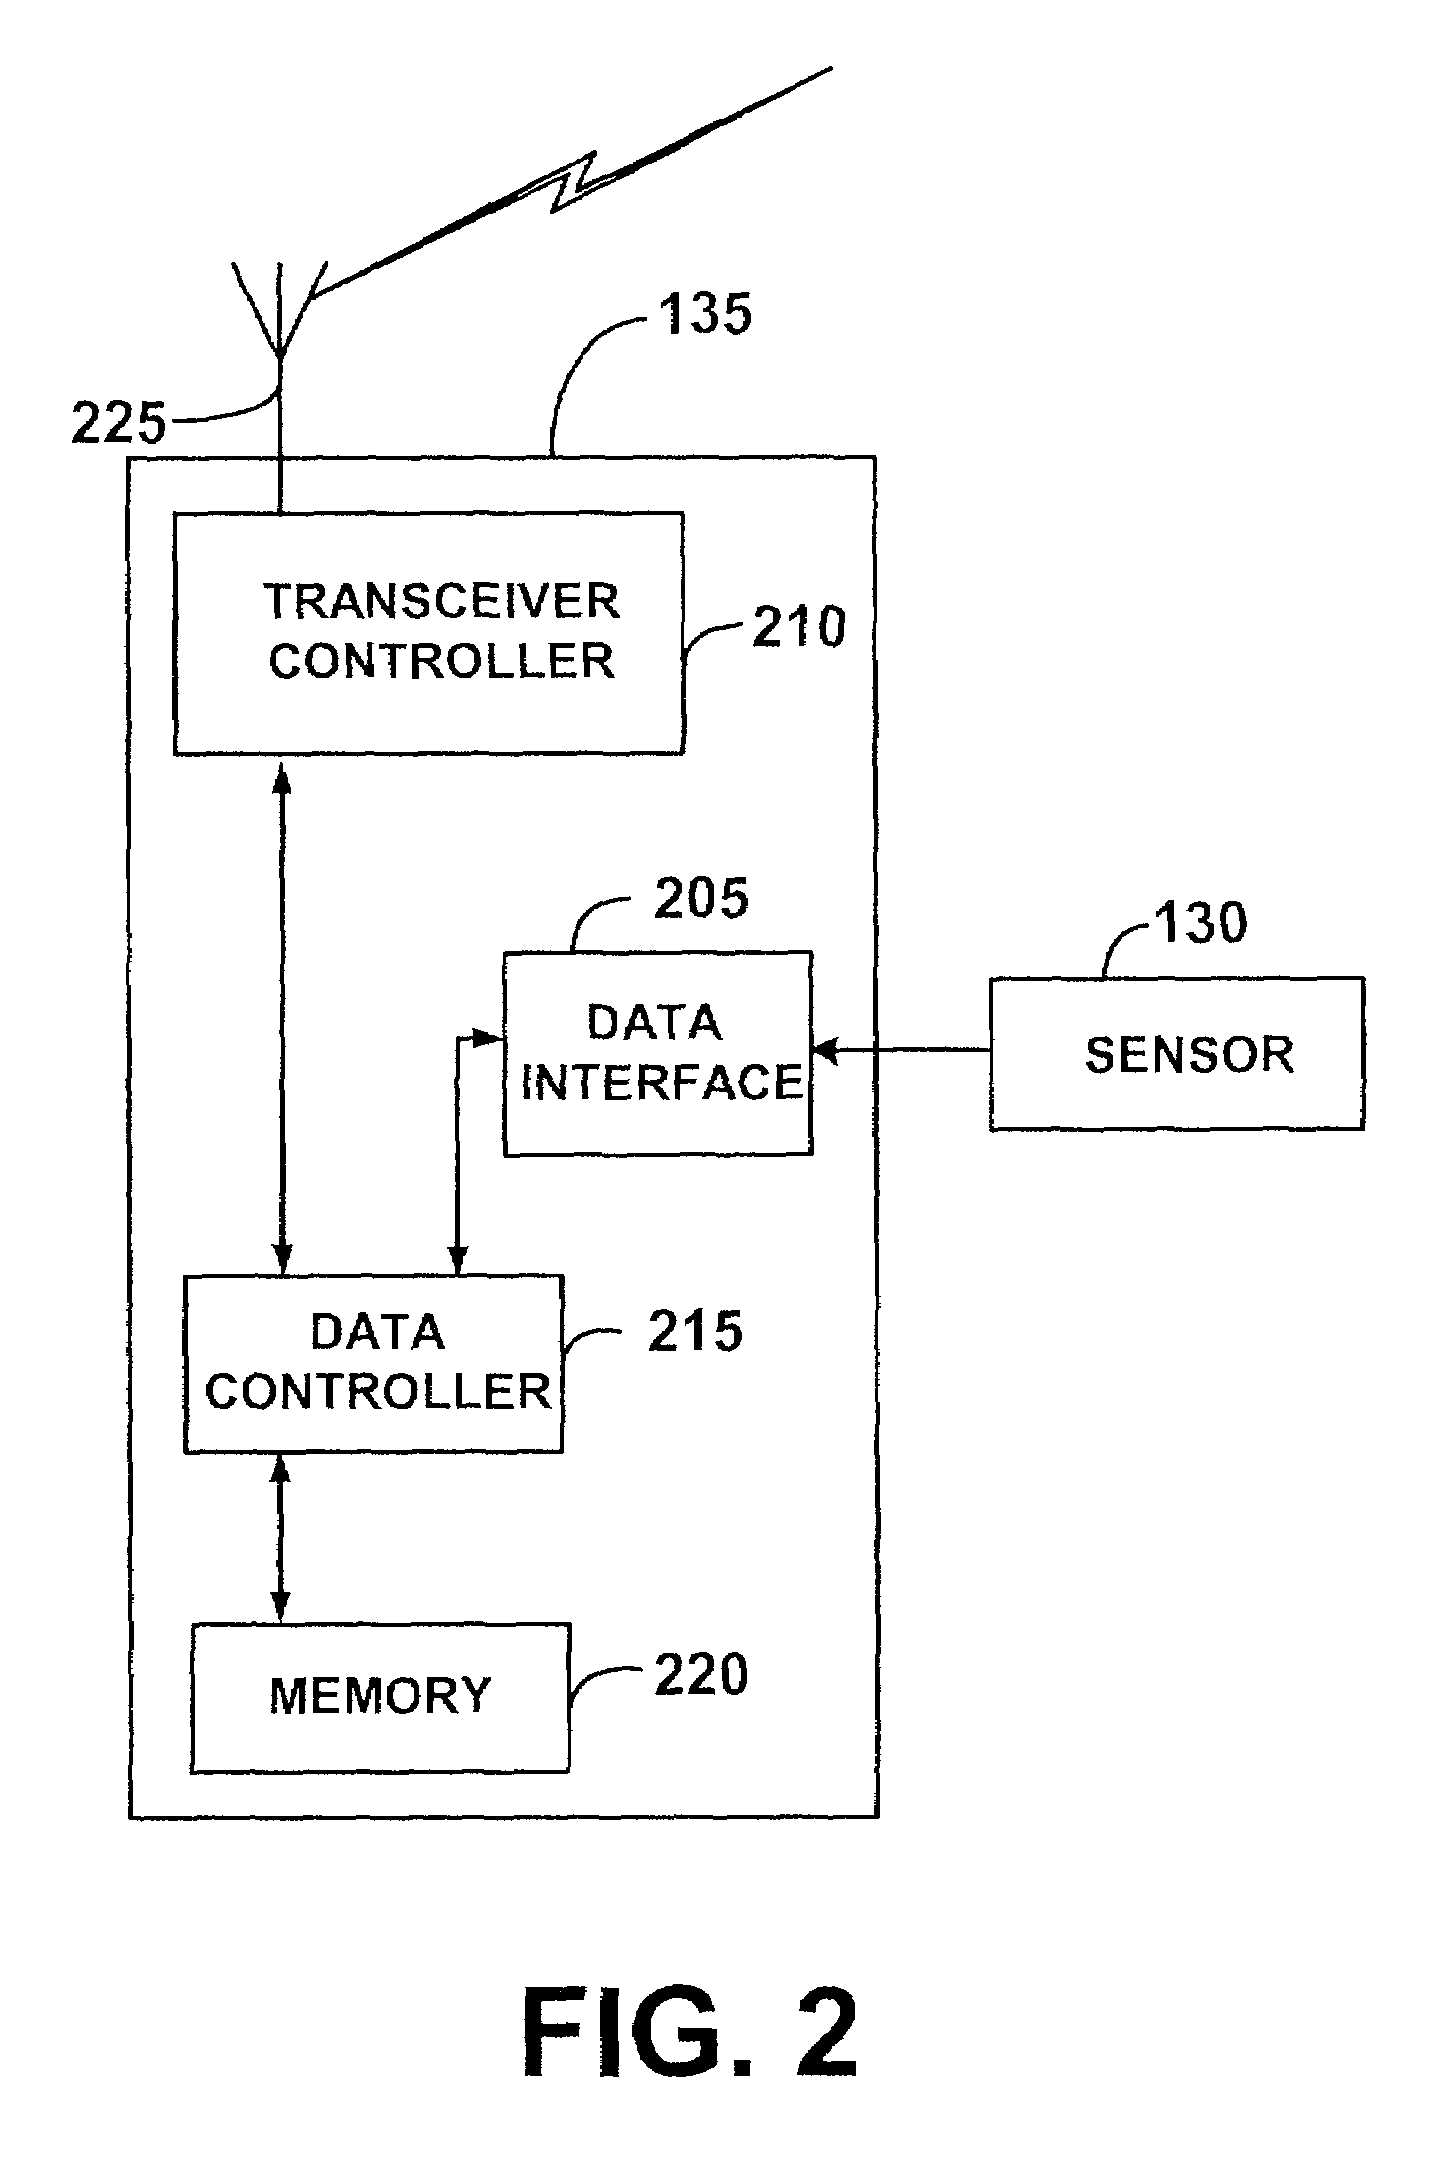 Systems and methods for enabling a mobile user to notify an automated monitoring system of an emergency situation